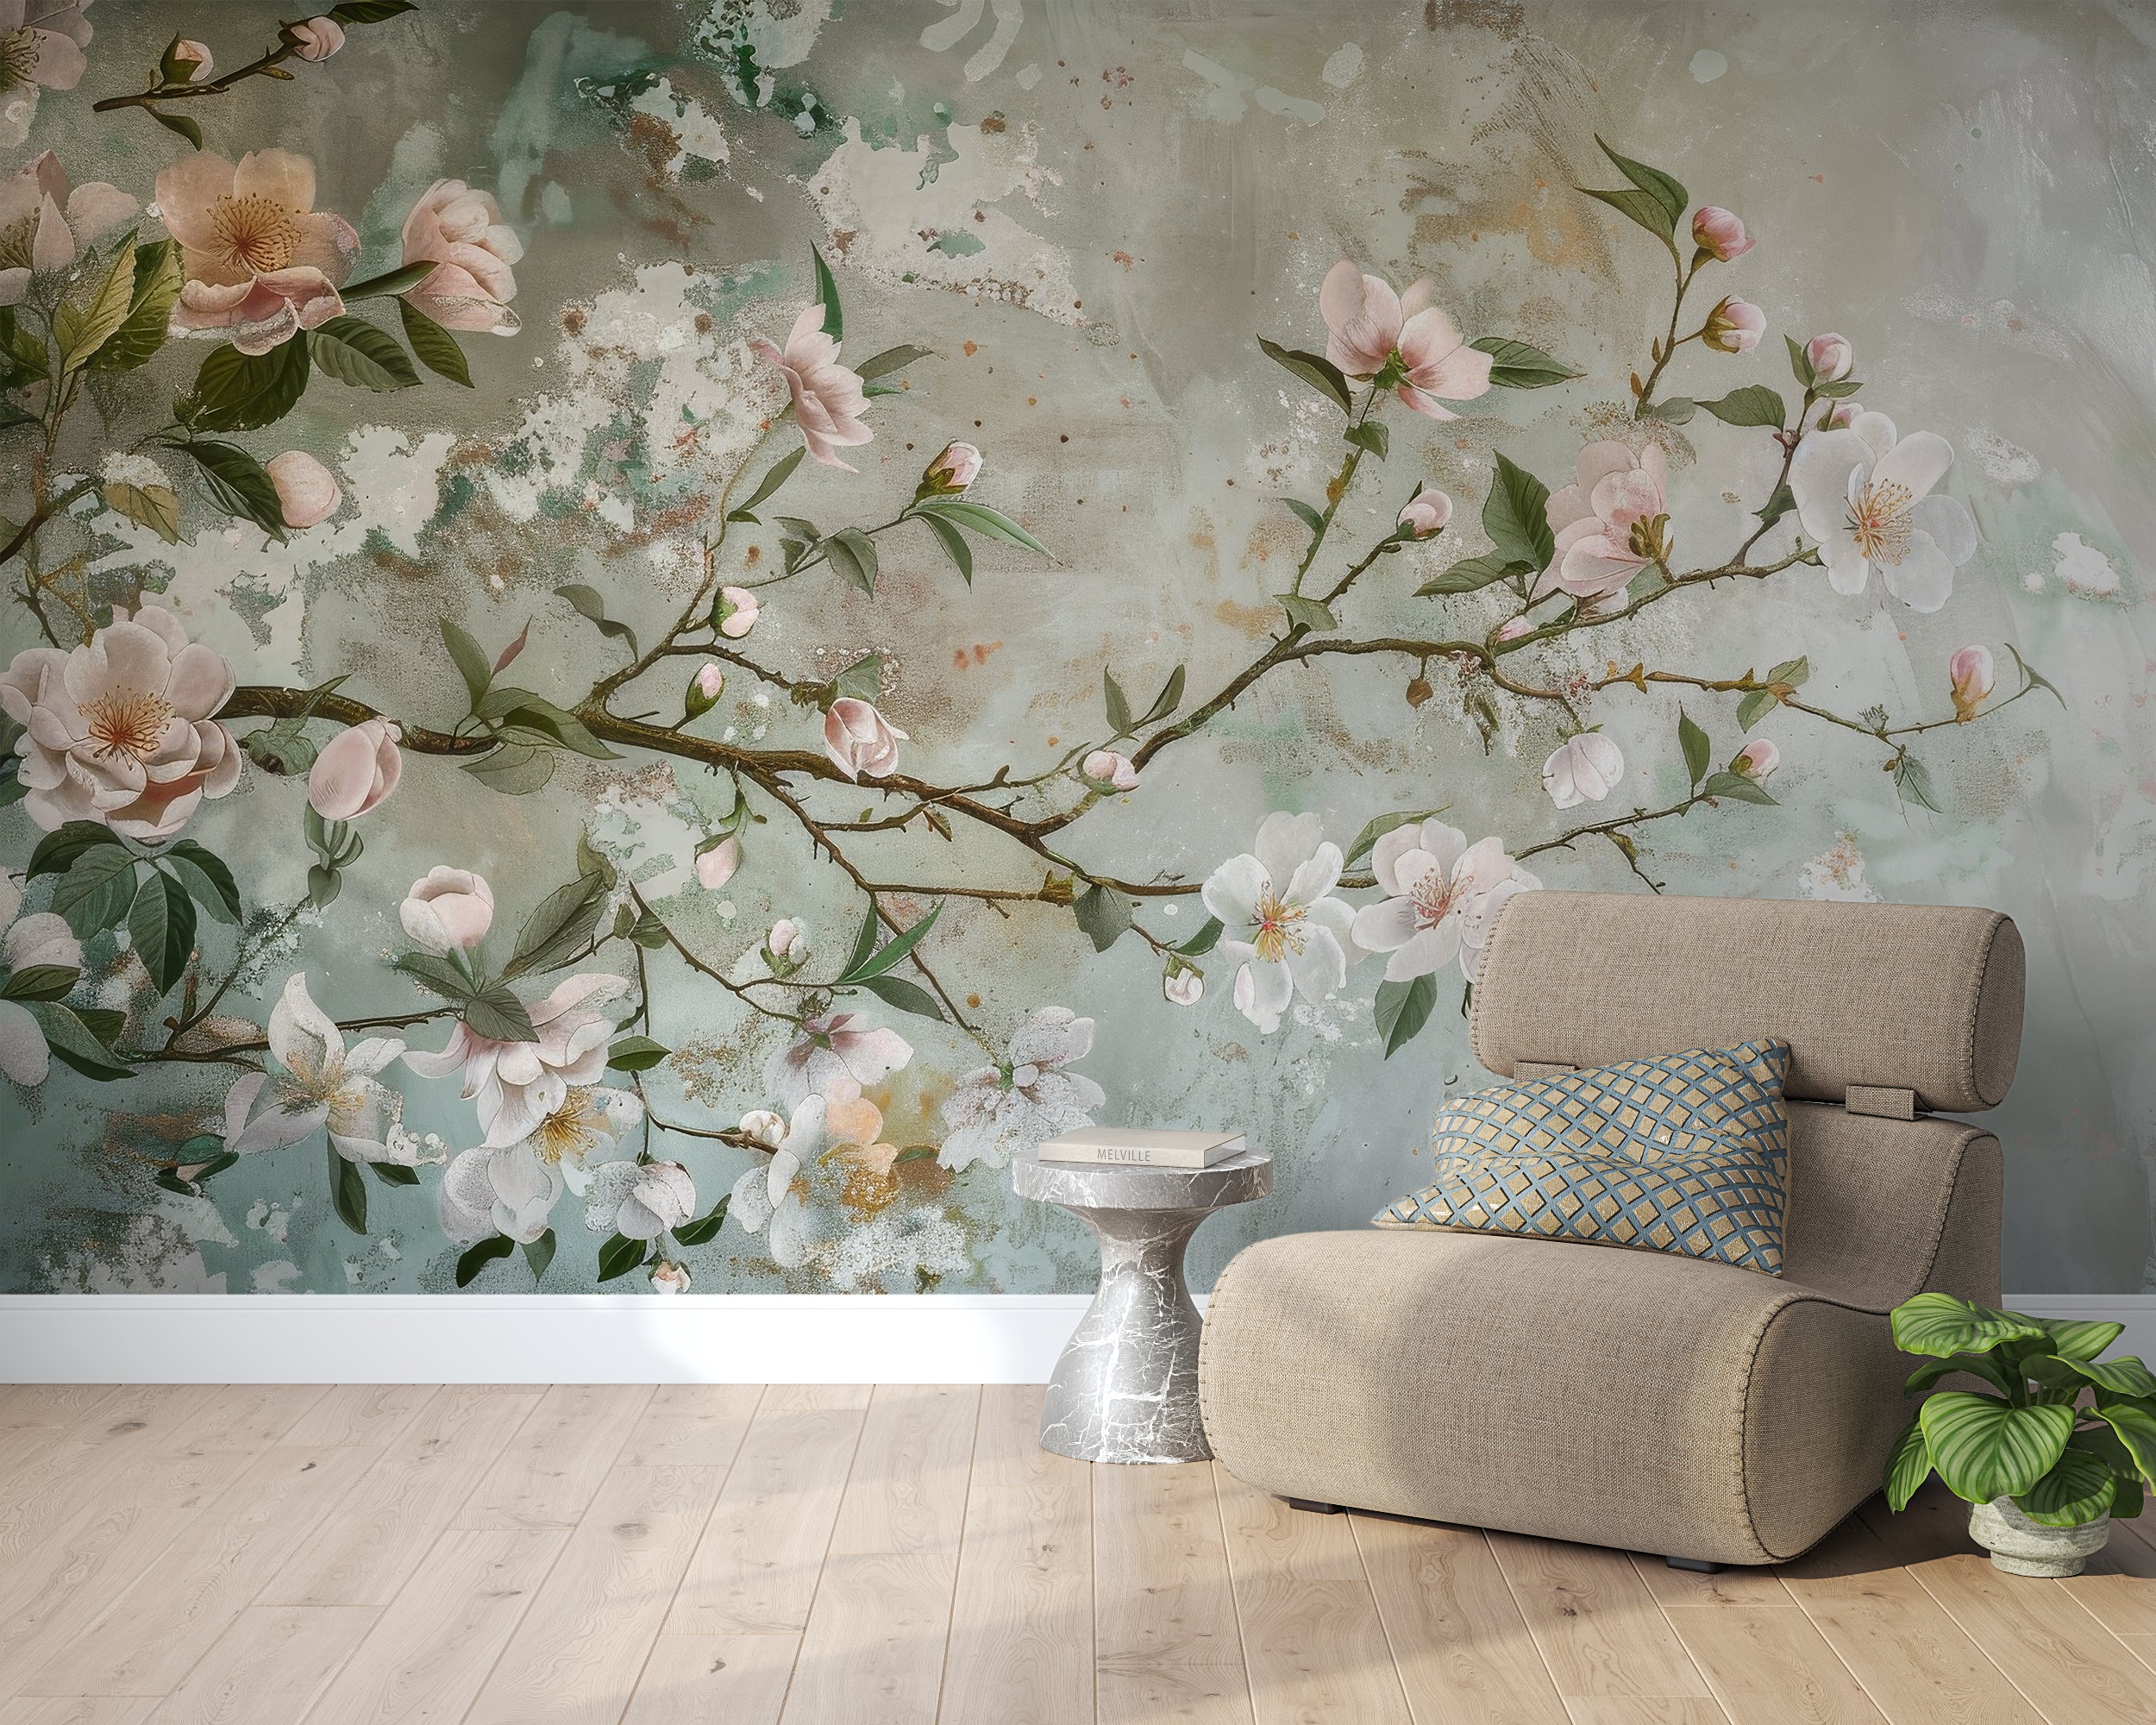 Dream of Chinoiserie: Floral Burst in wallpaper for an Elegant Ambiance